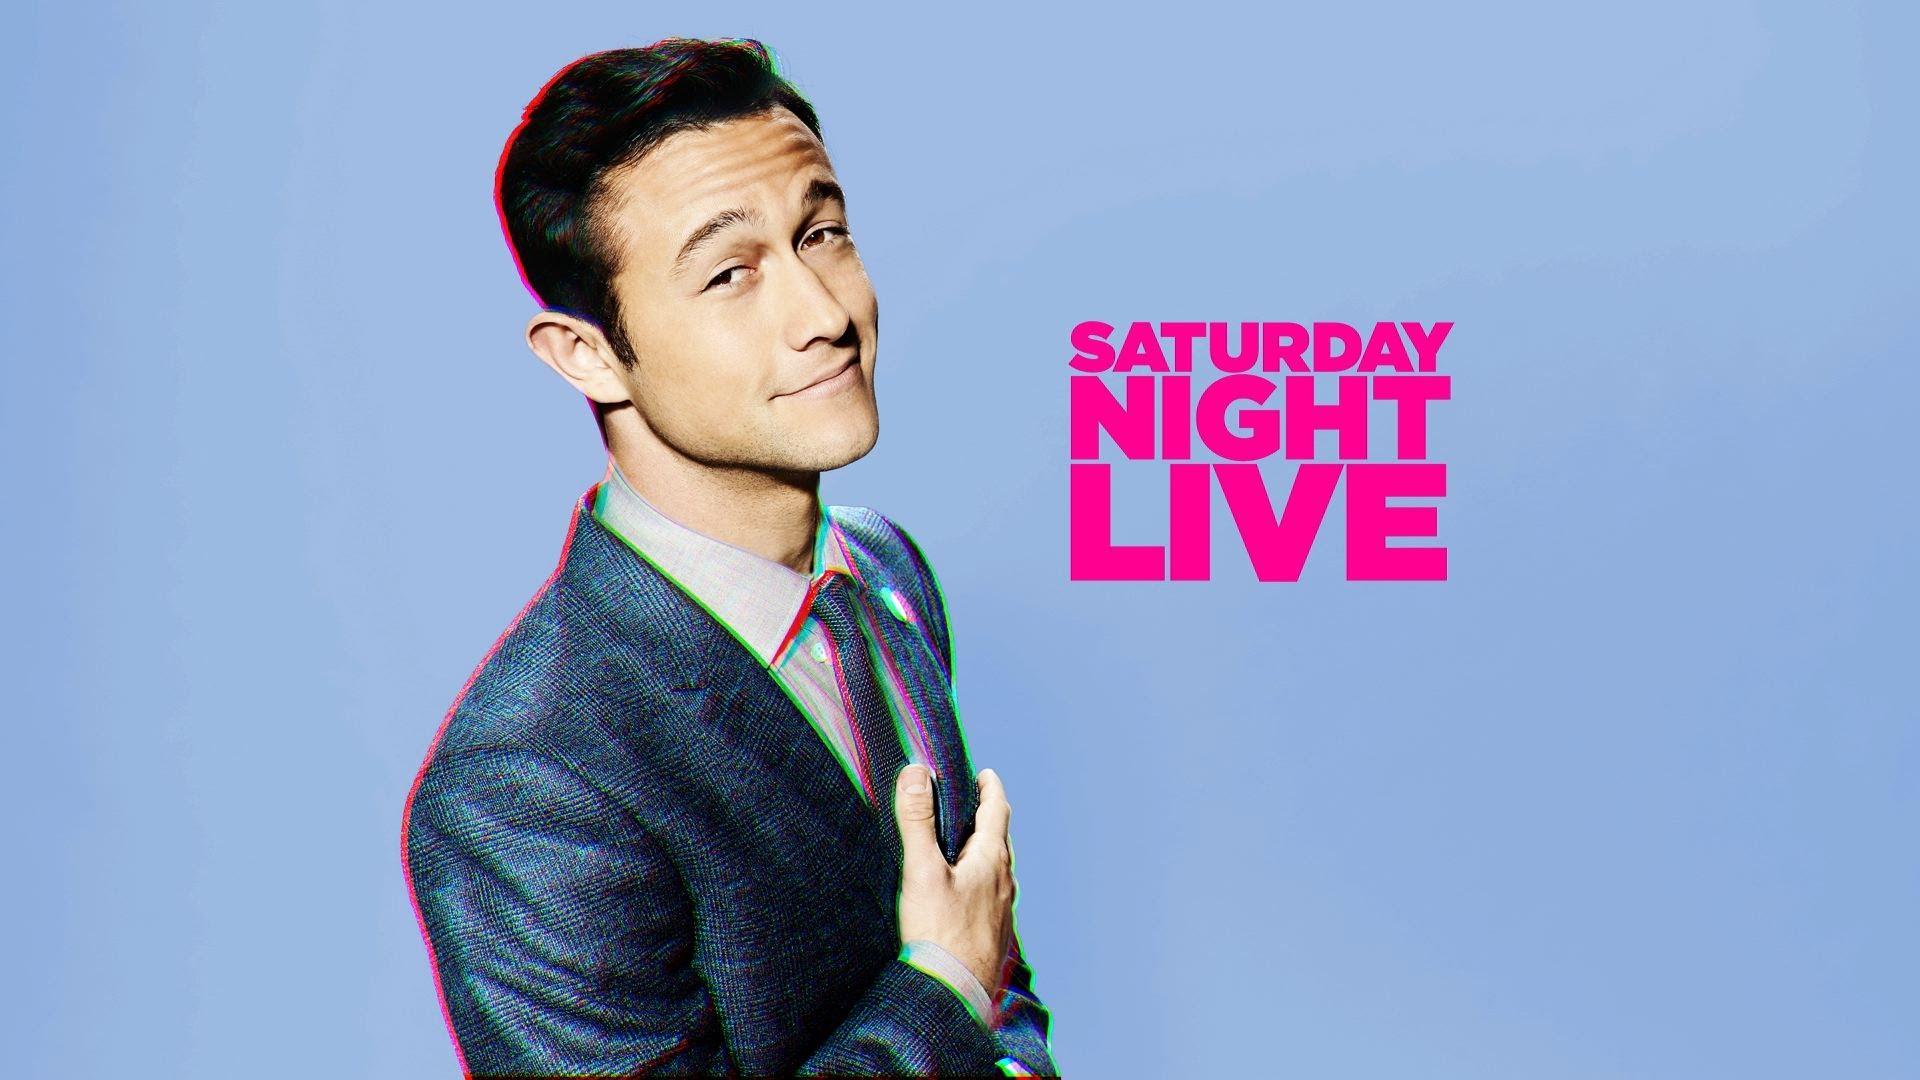 Saturday Night Live Wallpapers